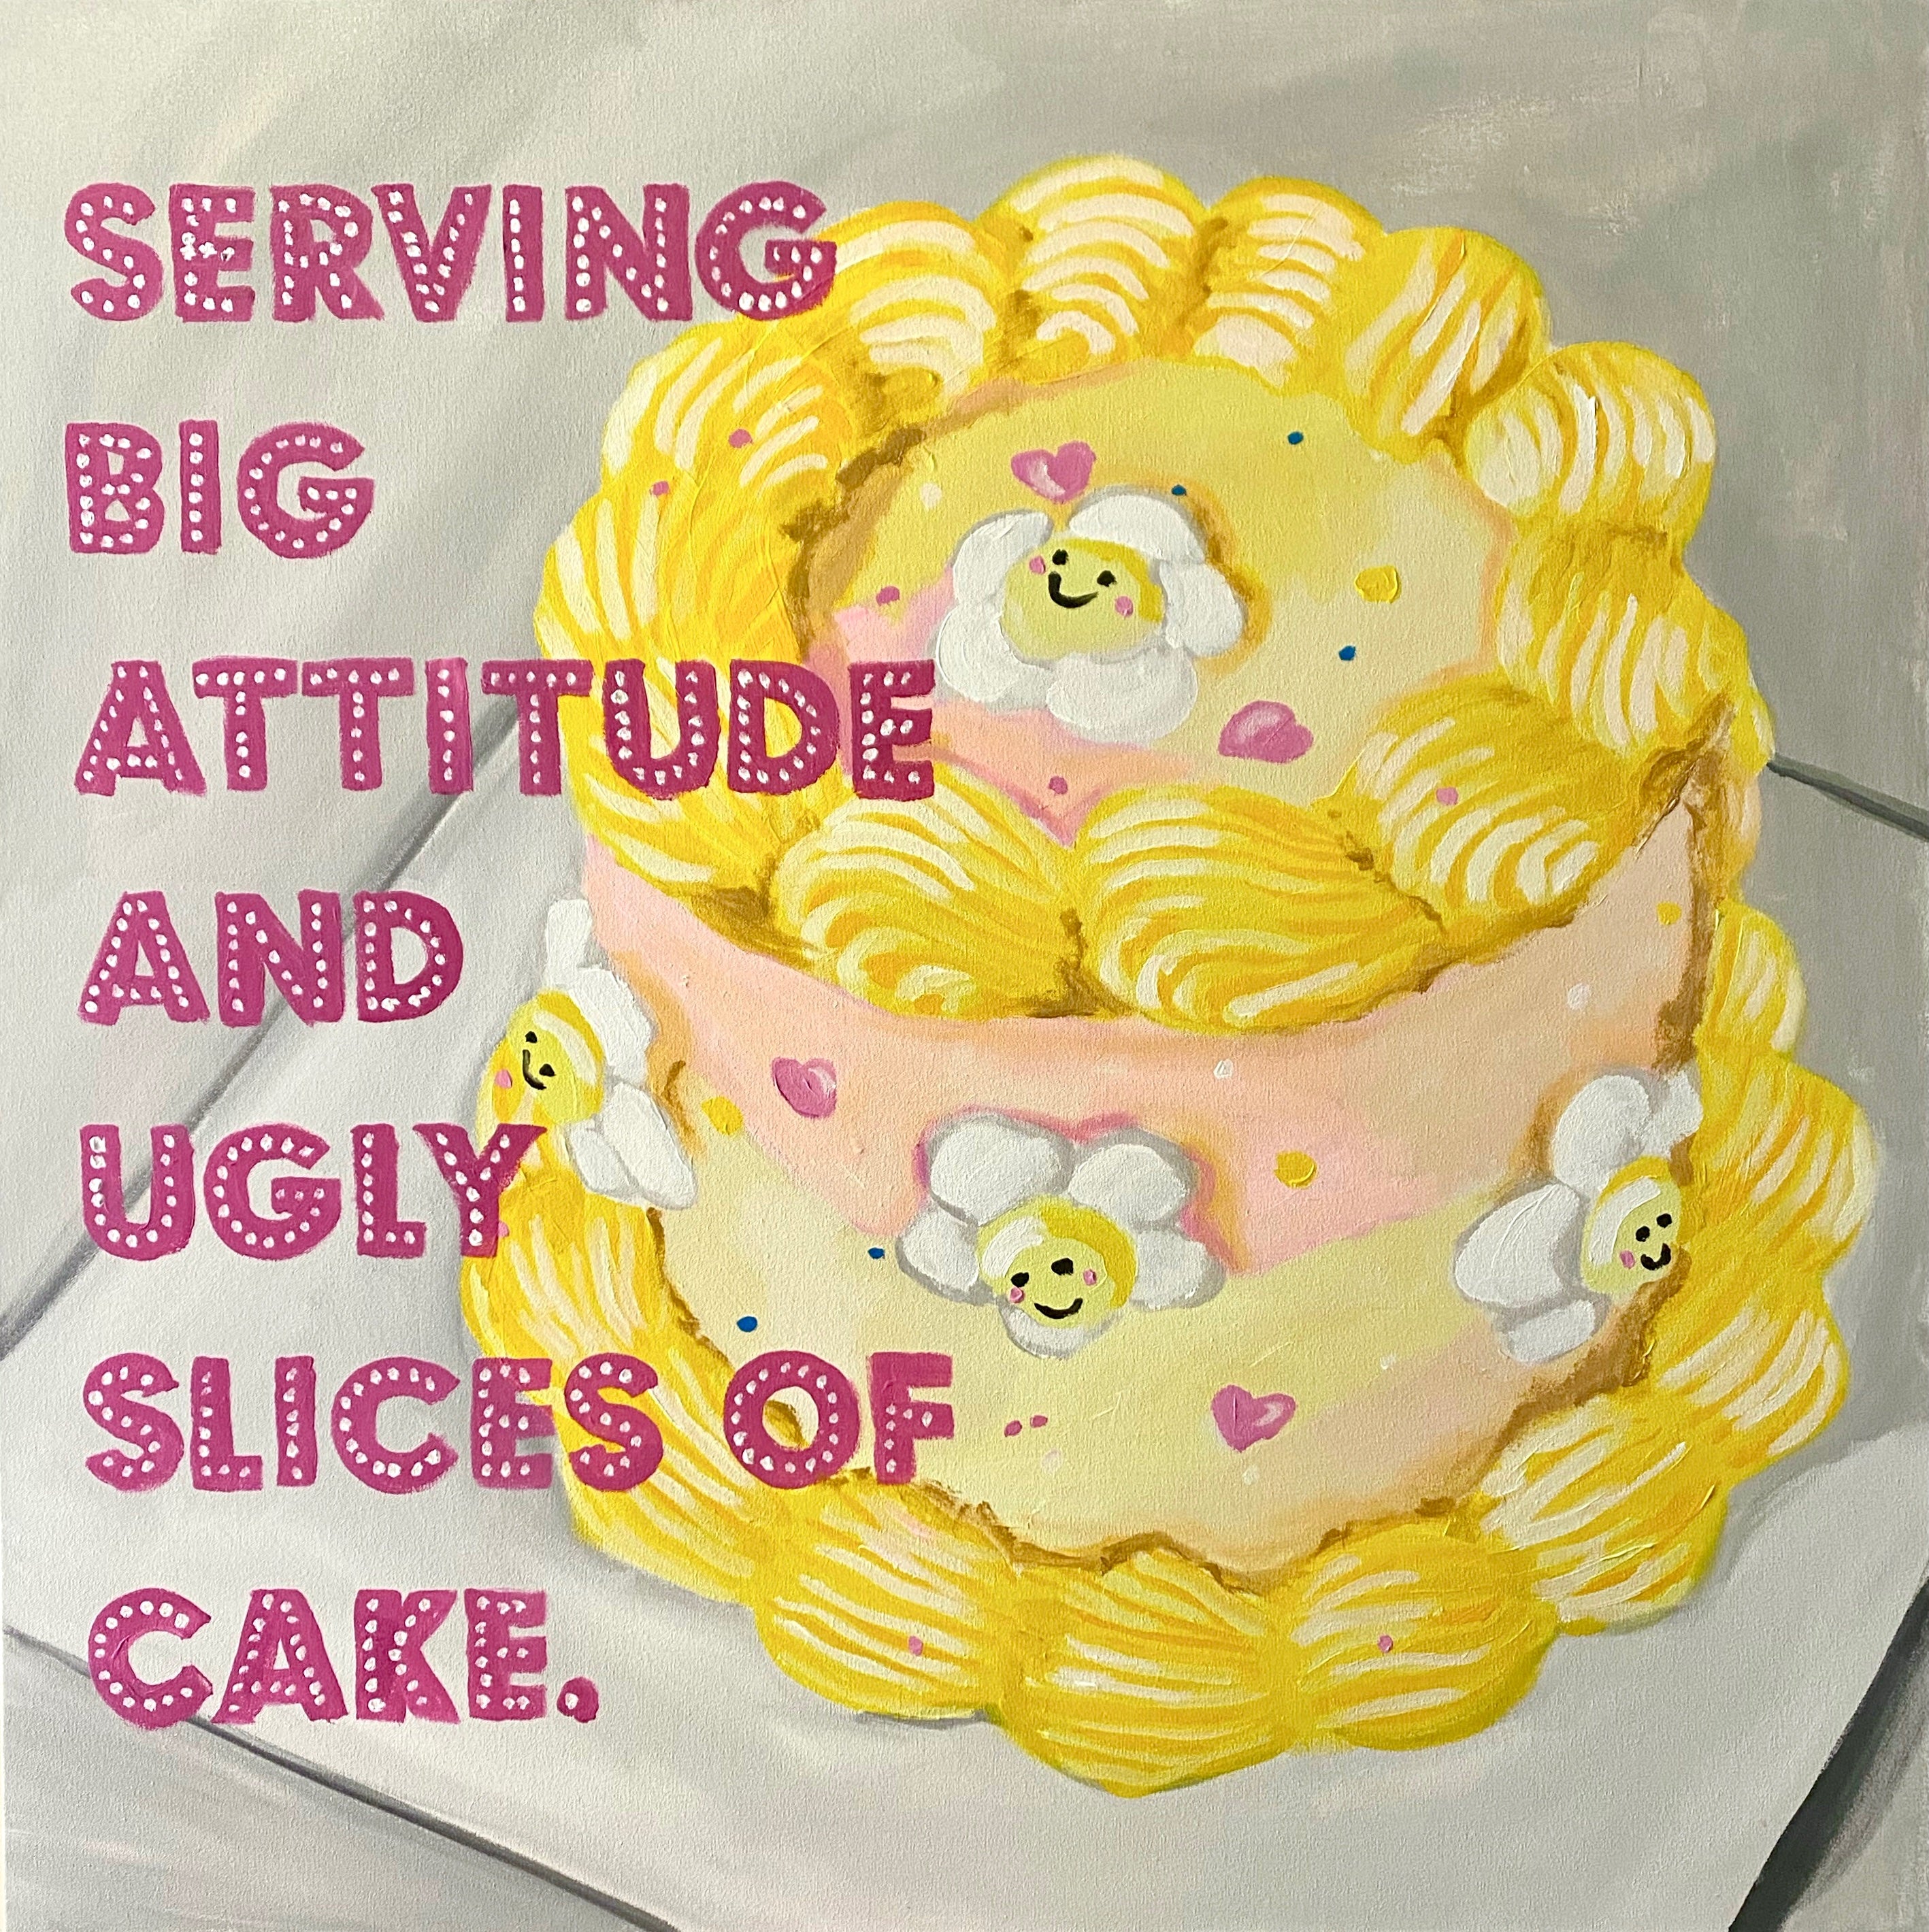 Serving Big Attitude and Ugly Slices of Cake.